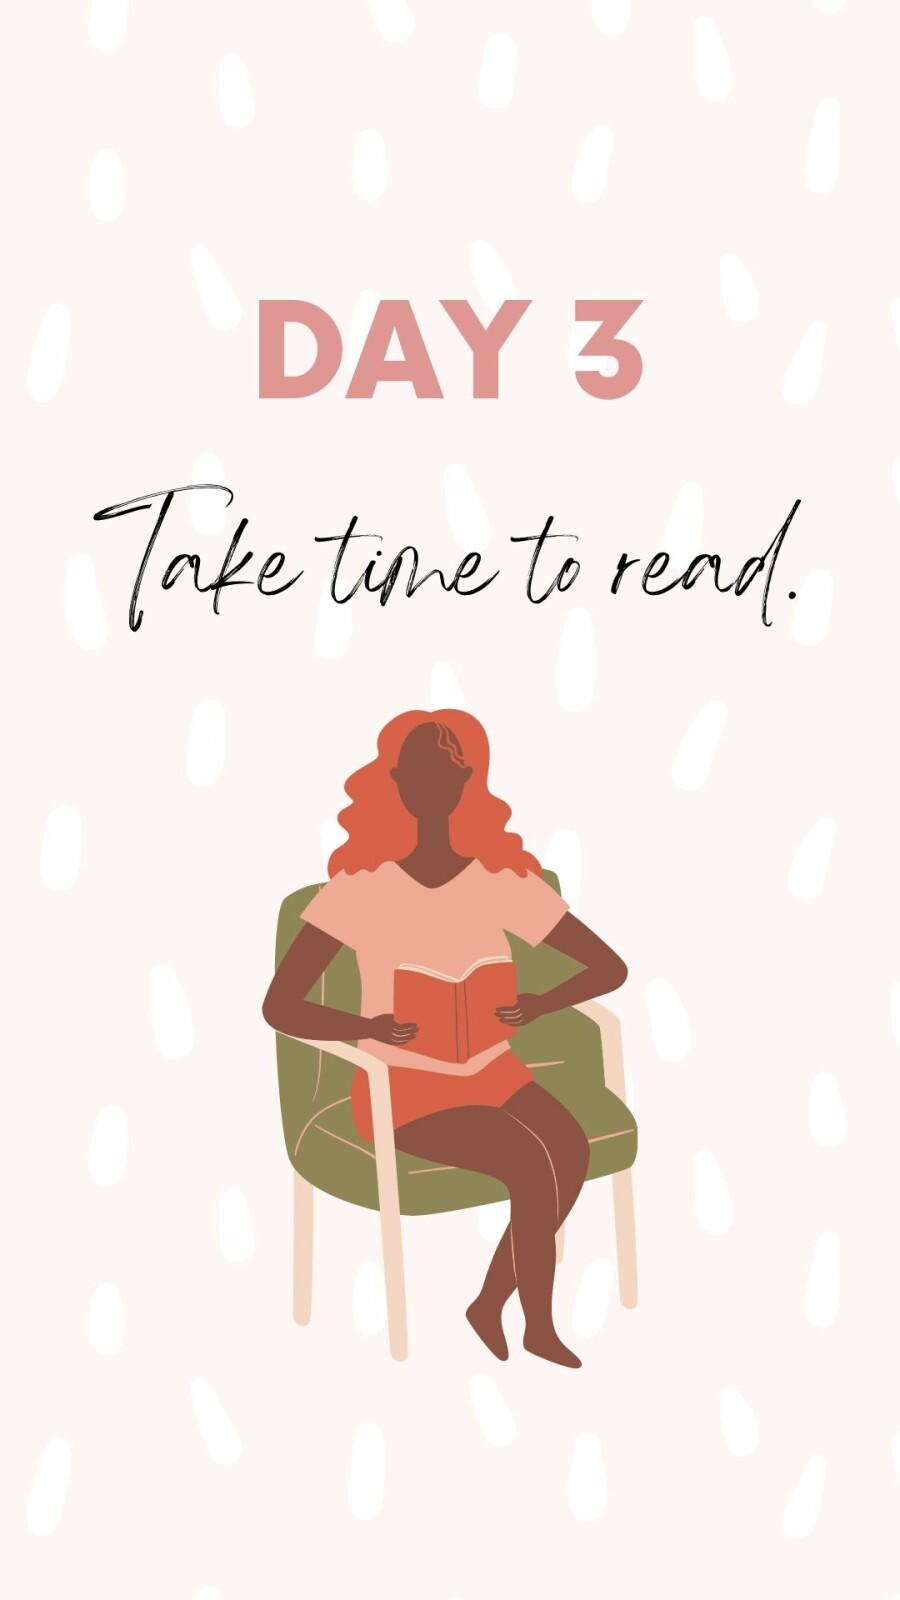 Self Love 101  Take time to read - Day 3